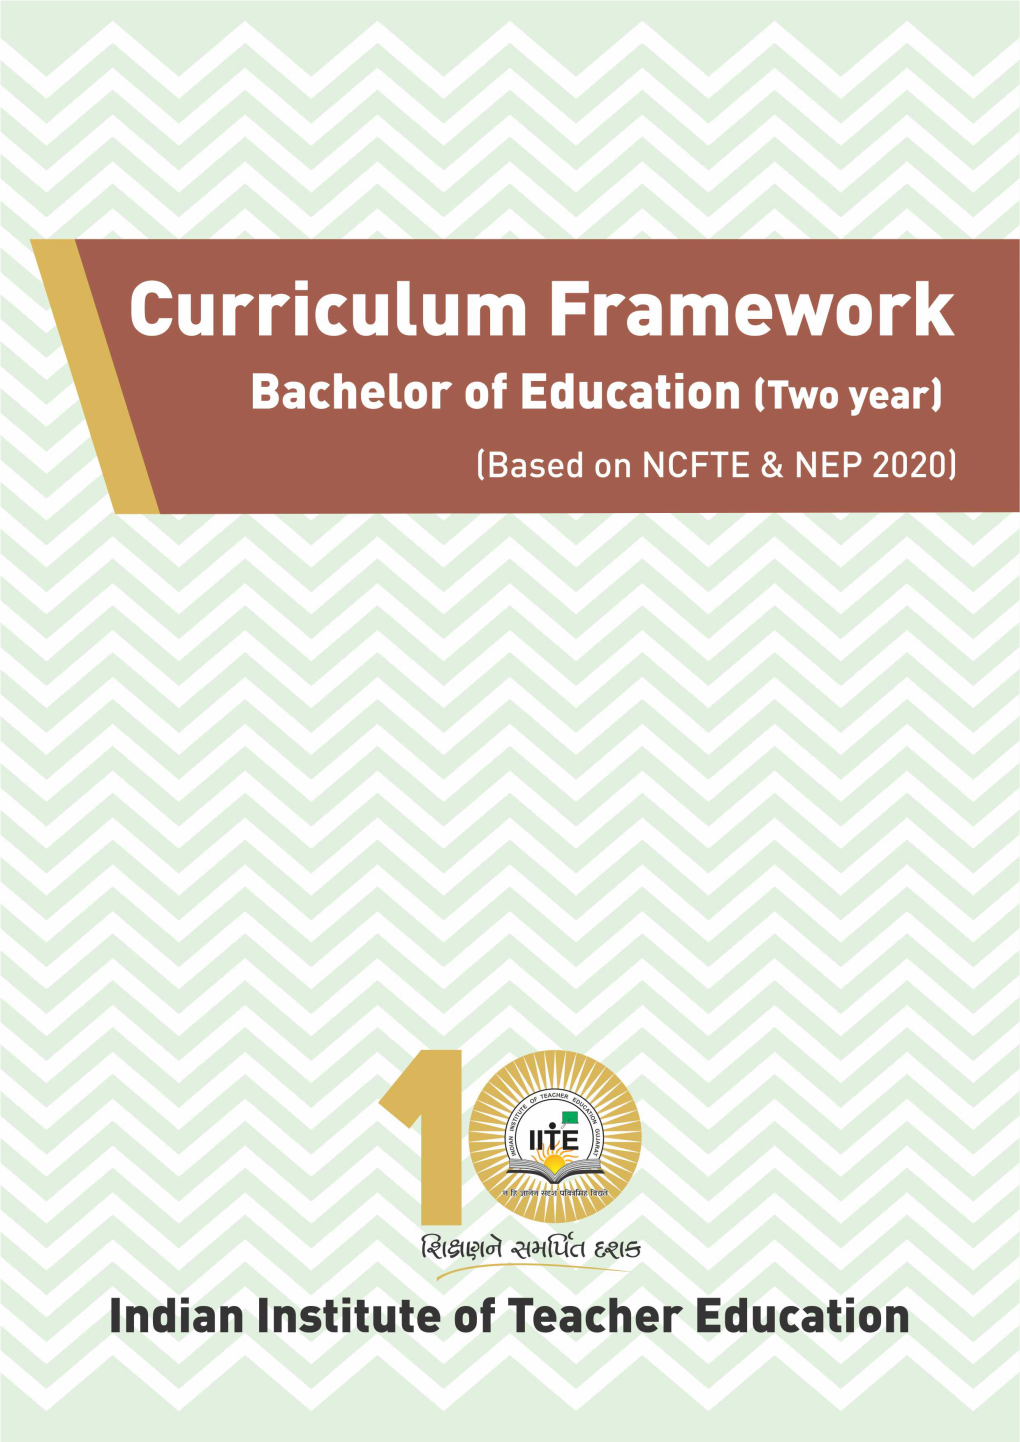 Curriculum Framework Bachelor of Education (2- Year) from AY 2020-21